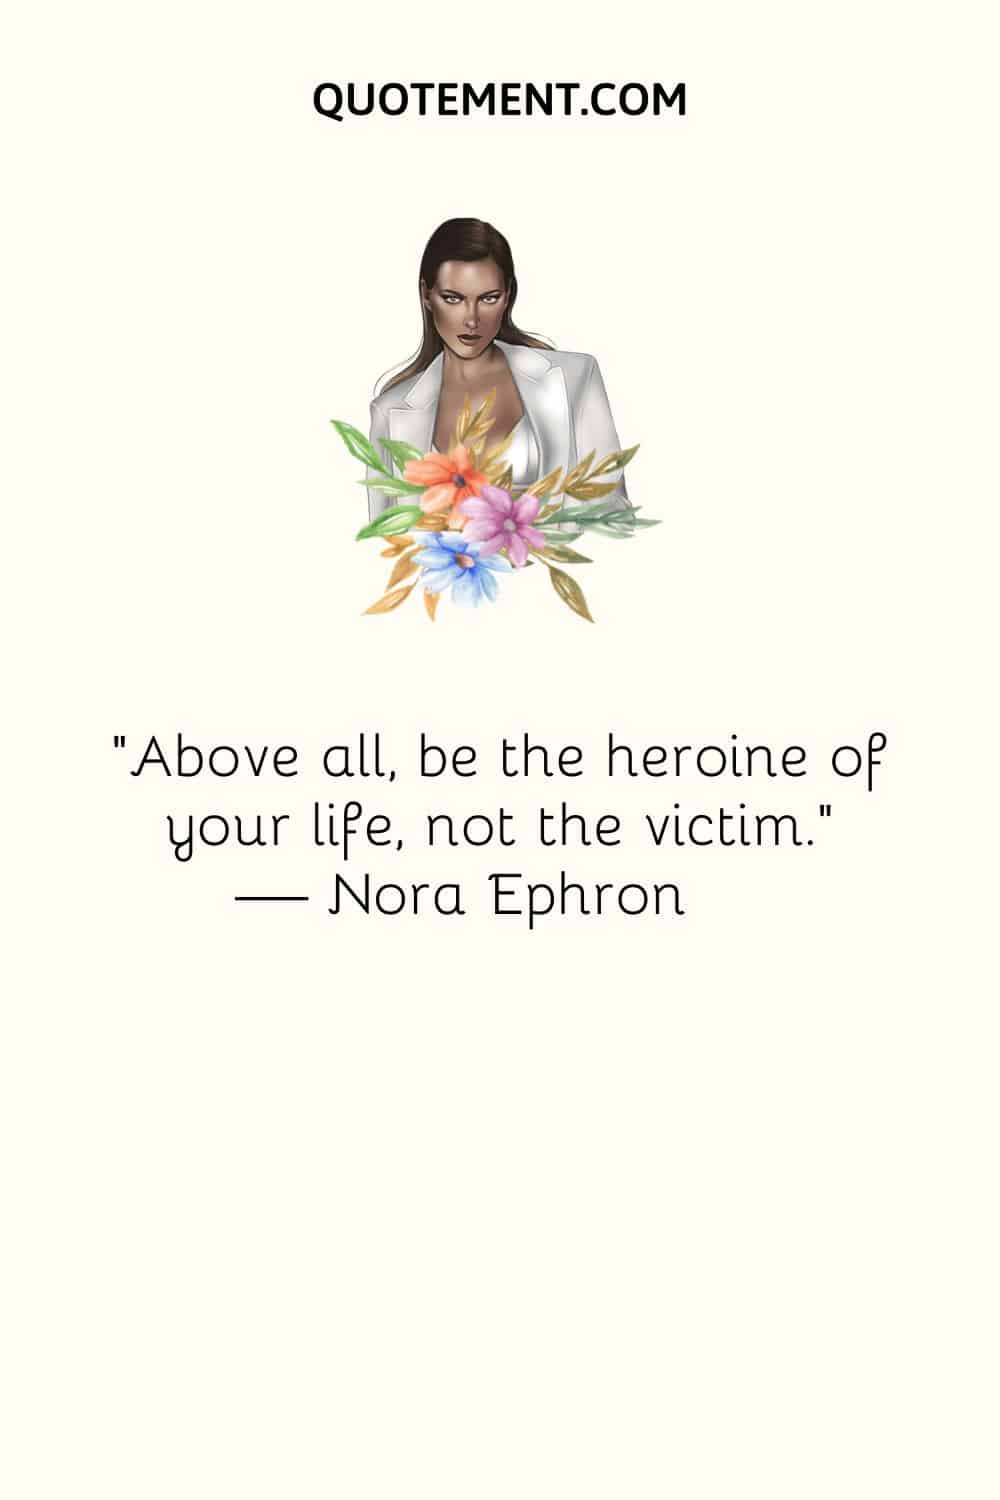 Above all, be the heroine of your life, not the victim